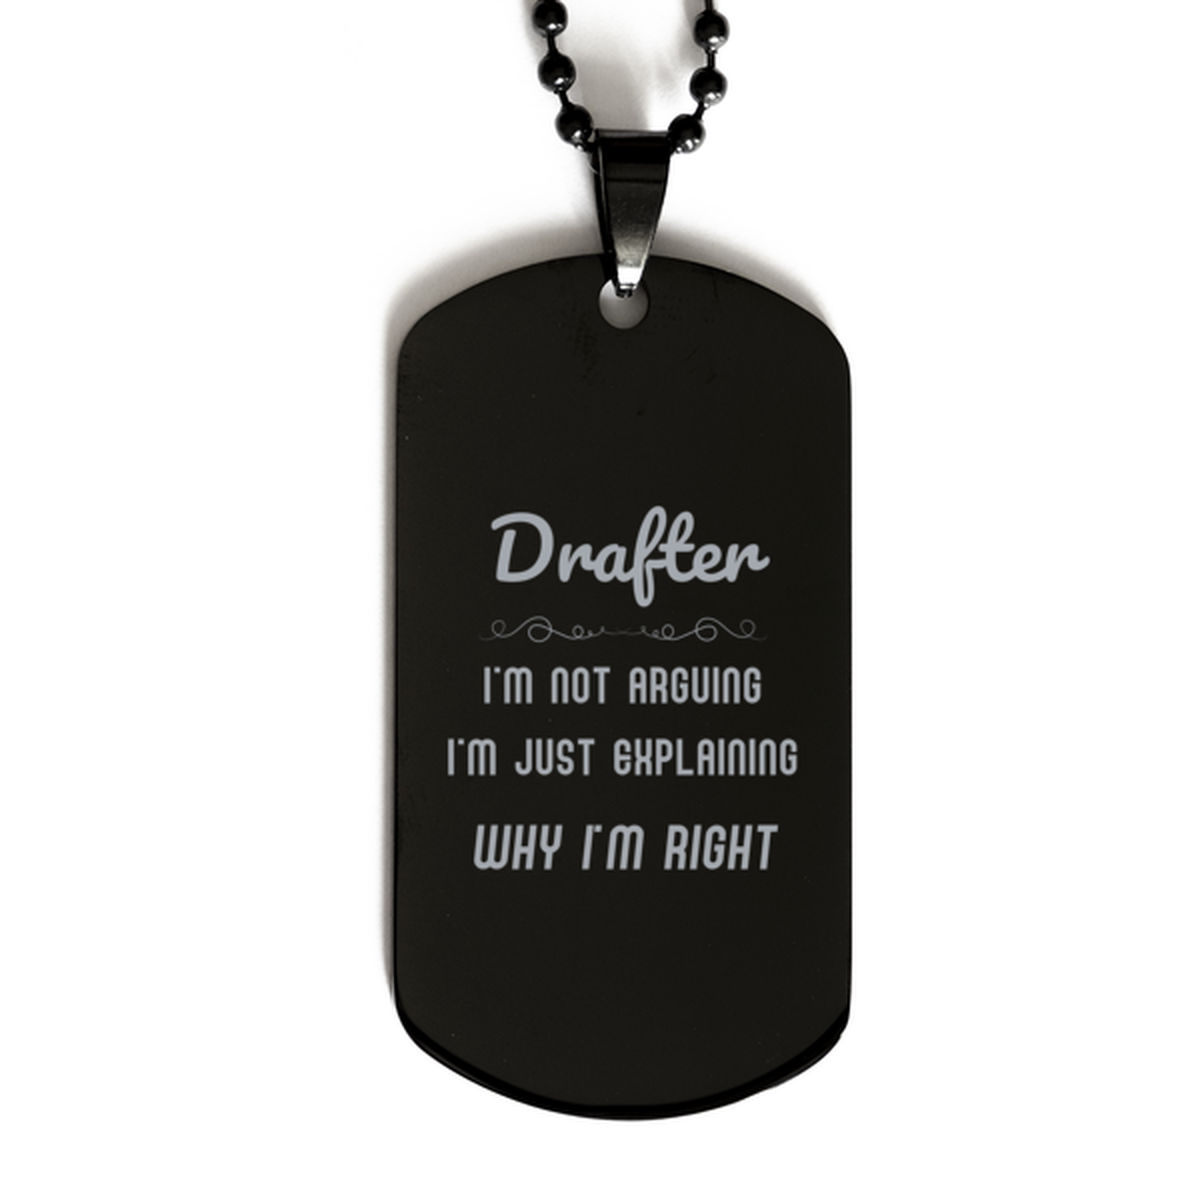 Drafter I'm not Arguing. I'm Just Explaining Why I'm RIGHT Black Dog Tag, Funny Saying Quote Drafter Gifts For Drafter Graduation Birthday Christmas Gifts for Men Women Coworker